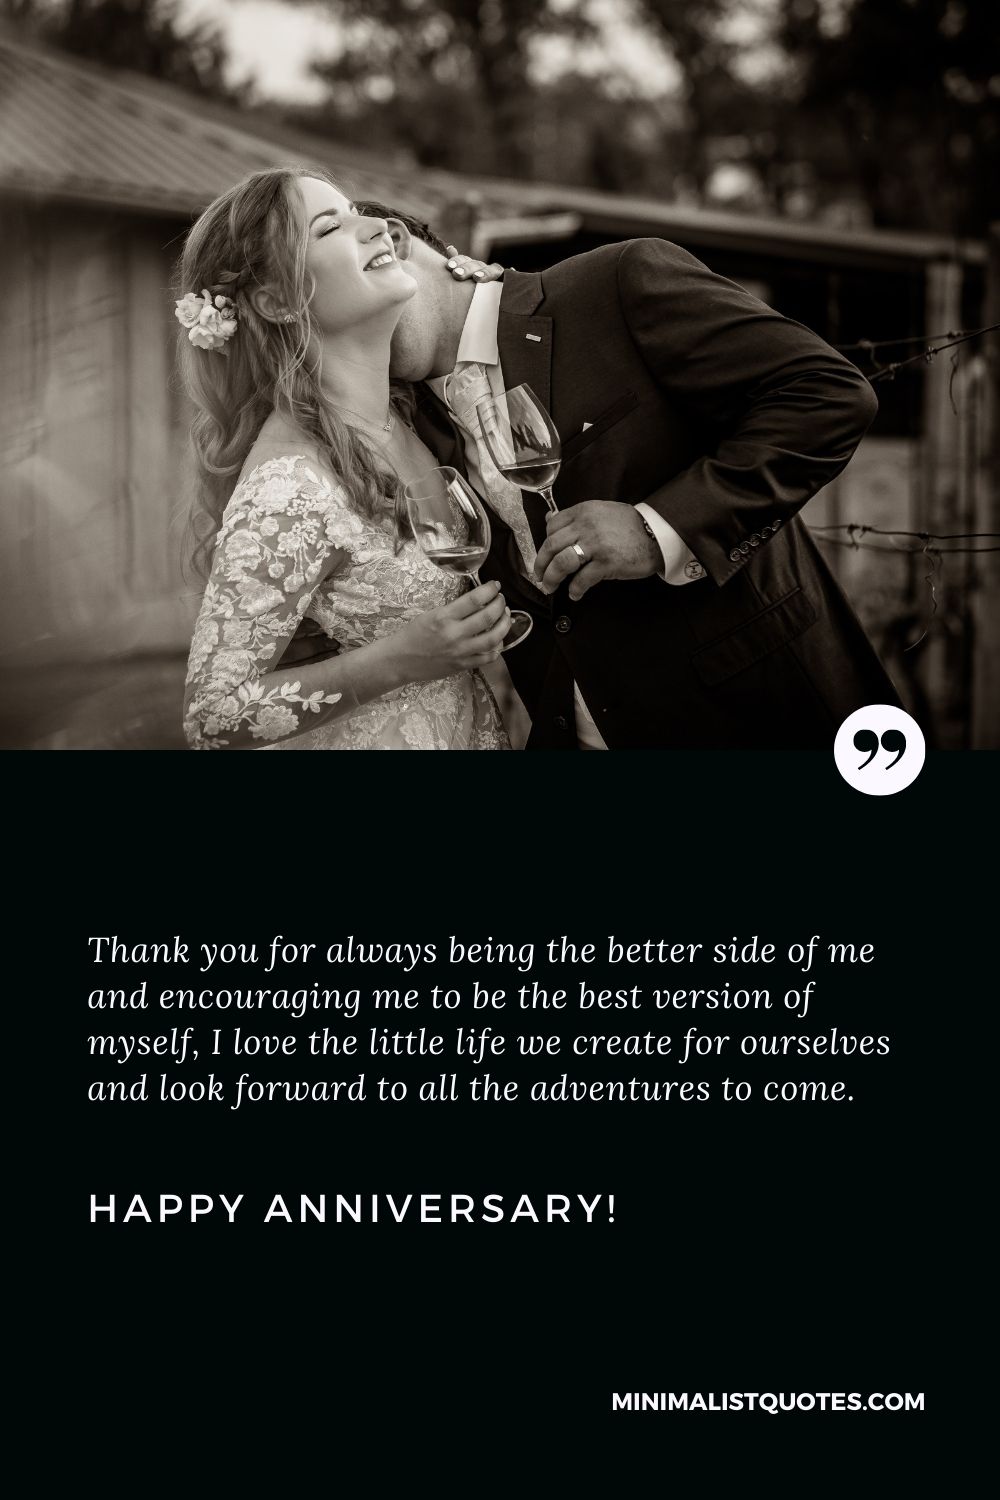 Happy anniversary my love: Thank you for always being the better side of me and encouraging me to be the best version of myself, I love the little life we ​​create for ourselves and look forward to all the adventures to come. Happy Anniversary!